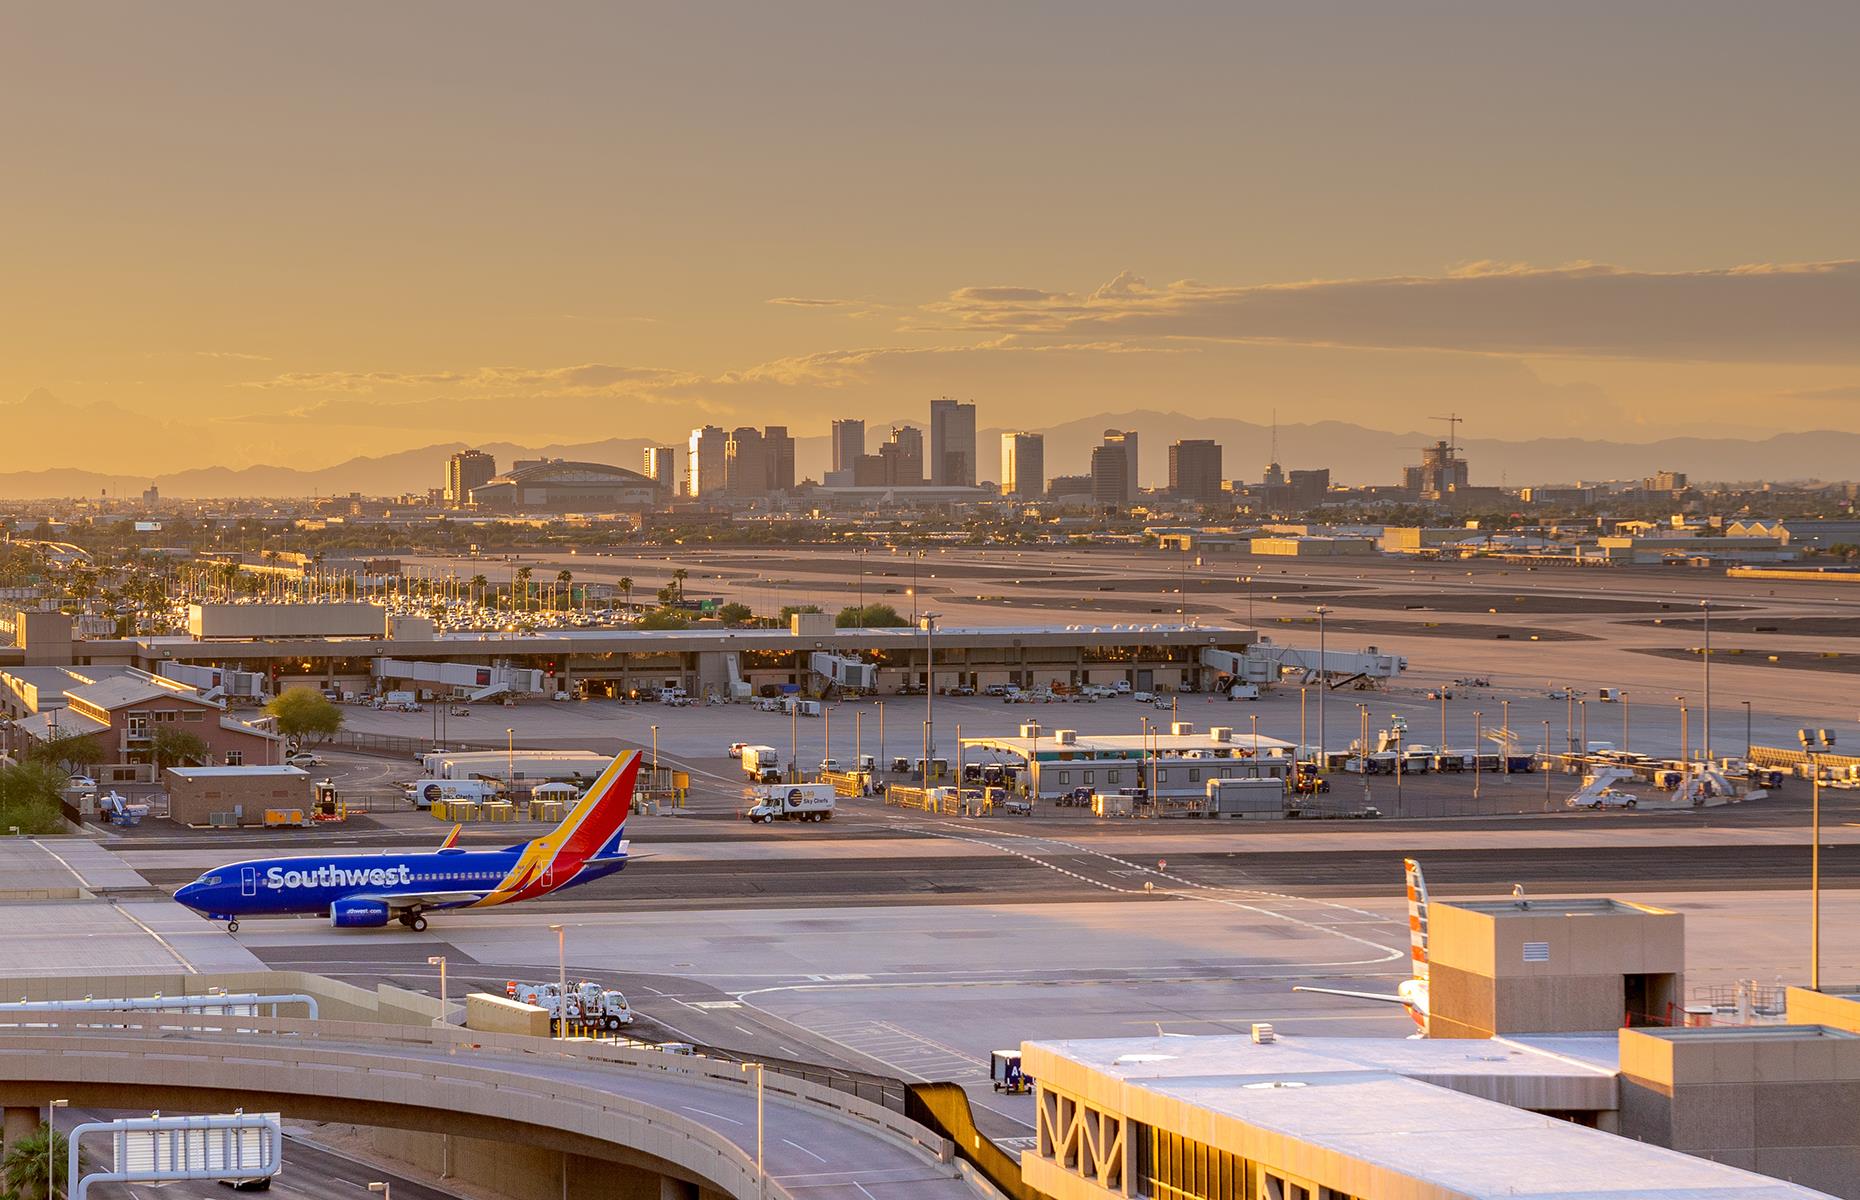 <p>Winning the 2020 rankings for the mega airport category, with an excellent score of 805, Phoenix Sky Harbor International is one of the largest commercial airports in the USA. The hub is situated just three miles from downtown Phoenix and serves as both a military and civilian airport, with airlines like Southwest and American, as well as international carriers such as British Airways and Air Canada, serving its gates. </p>  <p><a href="https://www.loveexploring.com/galleries/81674/the-worlds-best-airports-youve-never-heard-of?page=1"><strong>Now take a look at the world's best airports you've never heard of</strong></a></p>